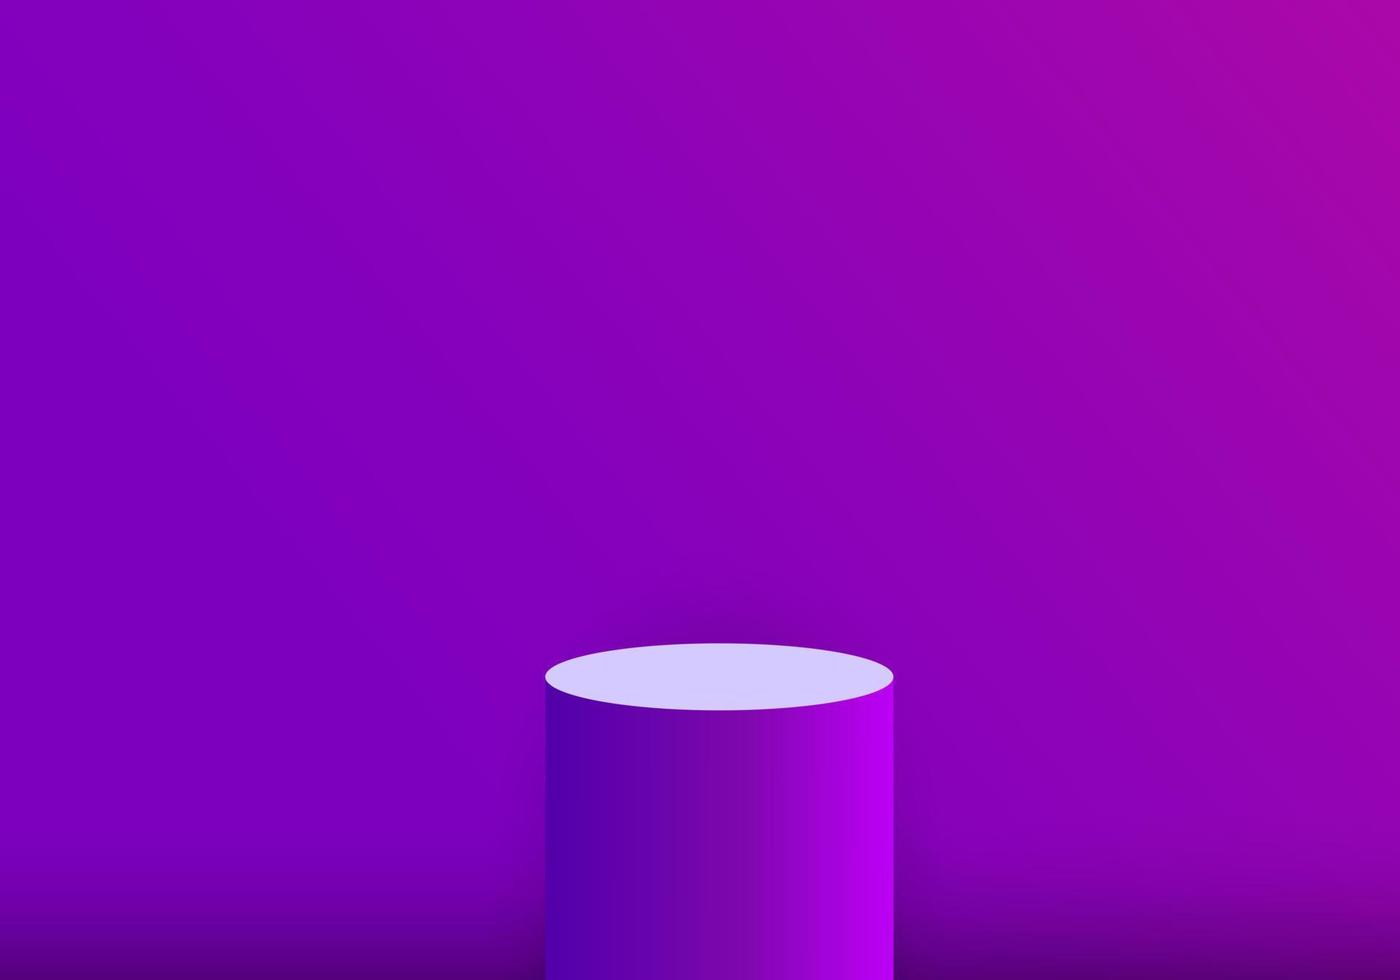 3d background products with purple tall spheres for displaying products. Gradient background to enhance the distinctiveness of the products to be placed. vector